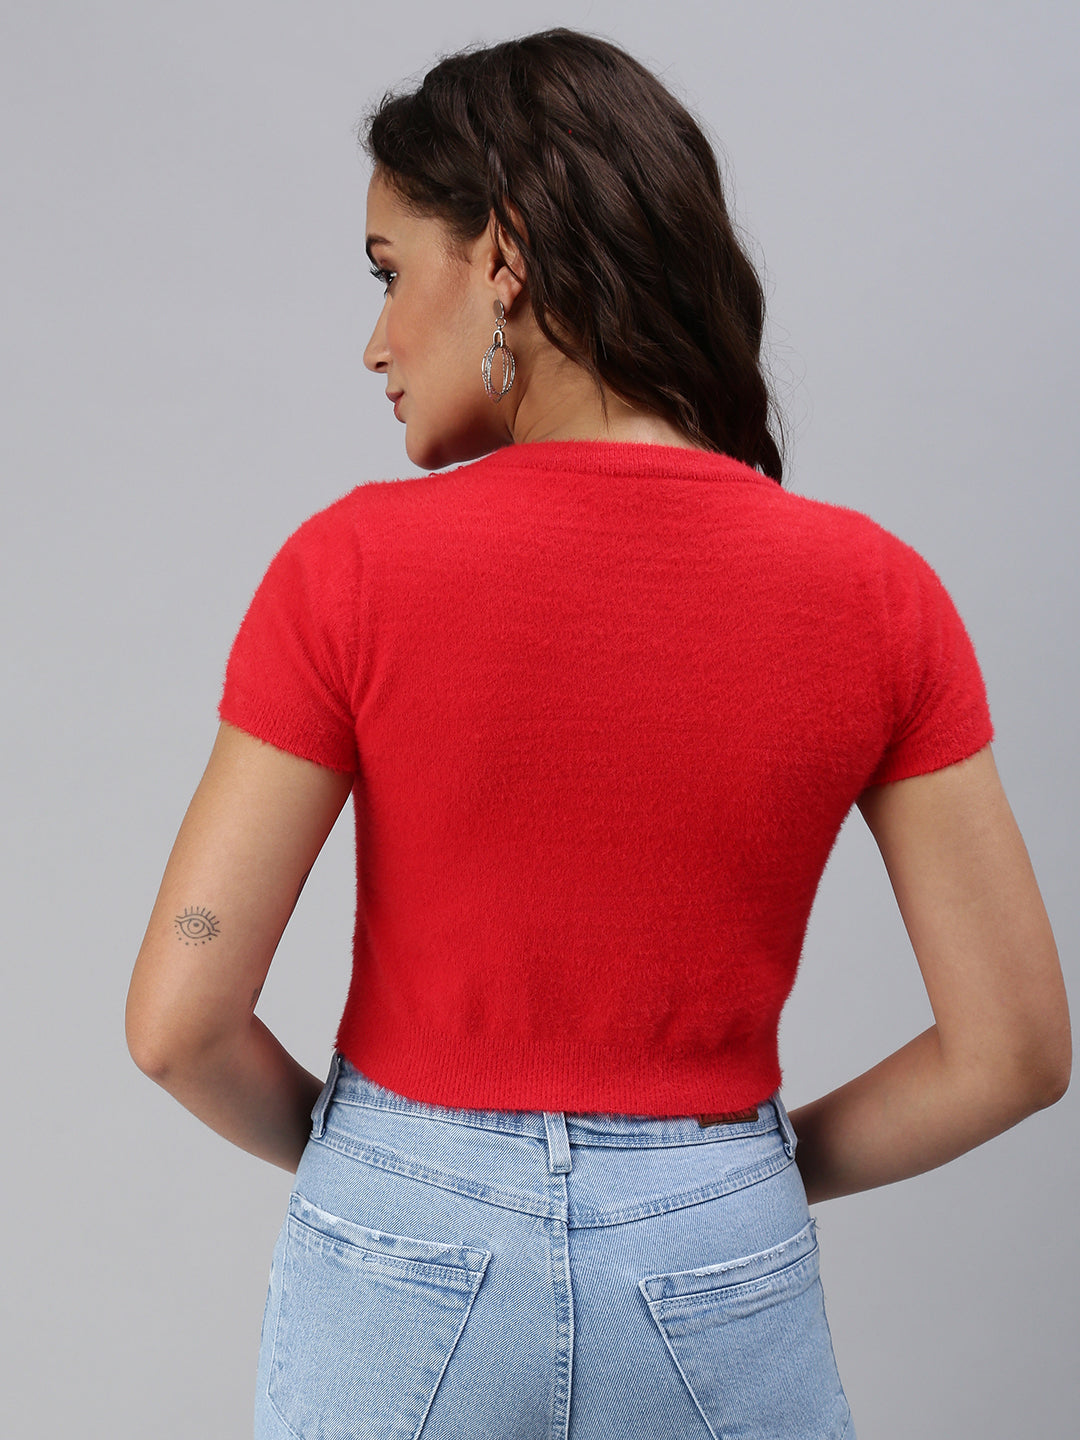 Women Solid Red Fitted Top